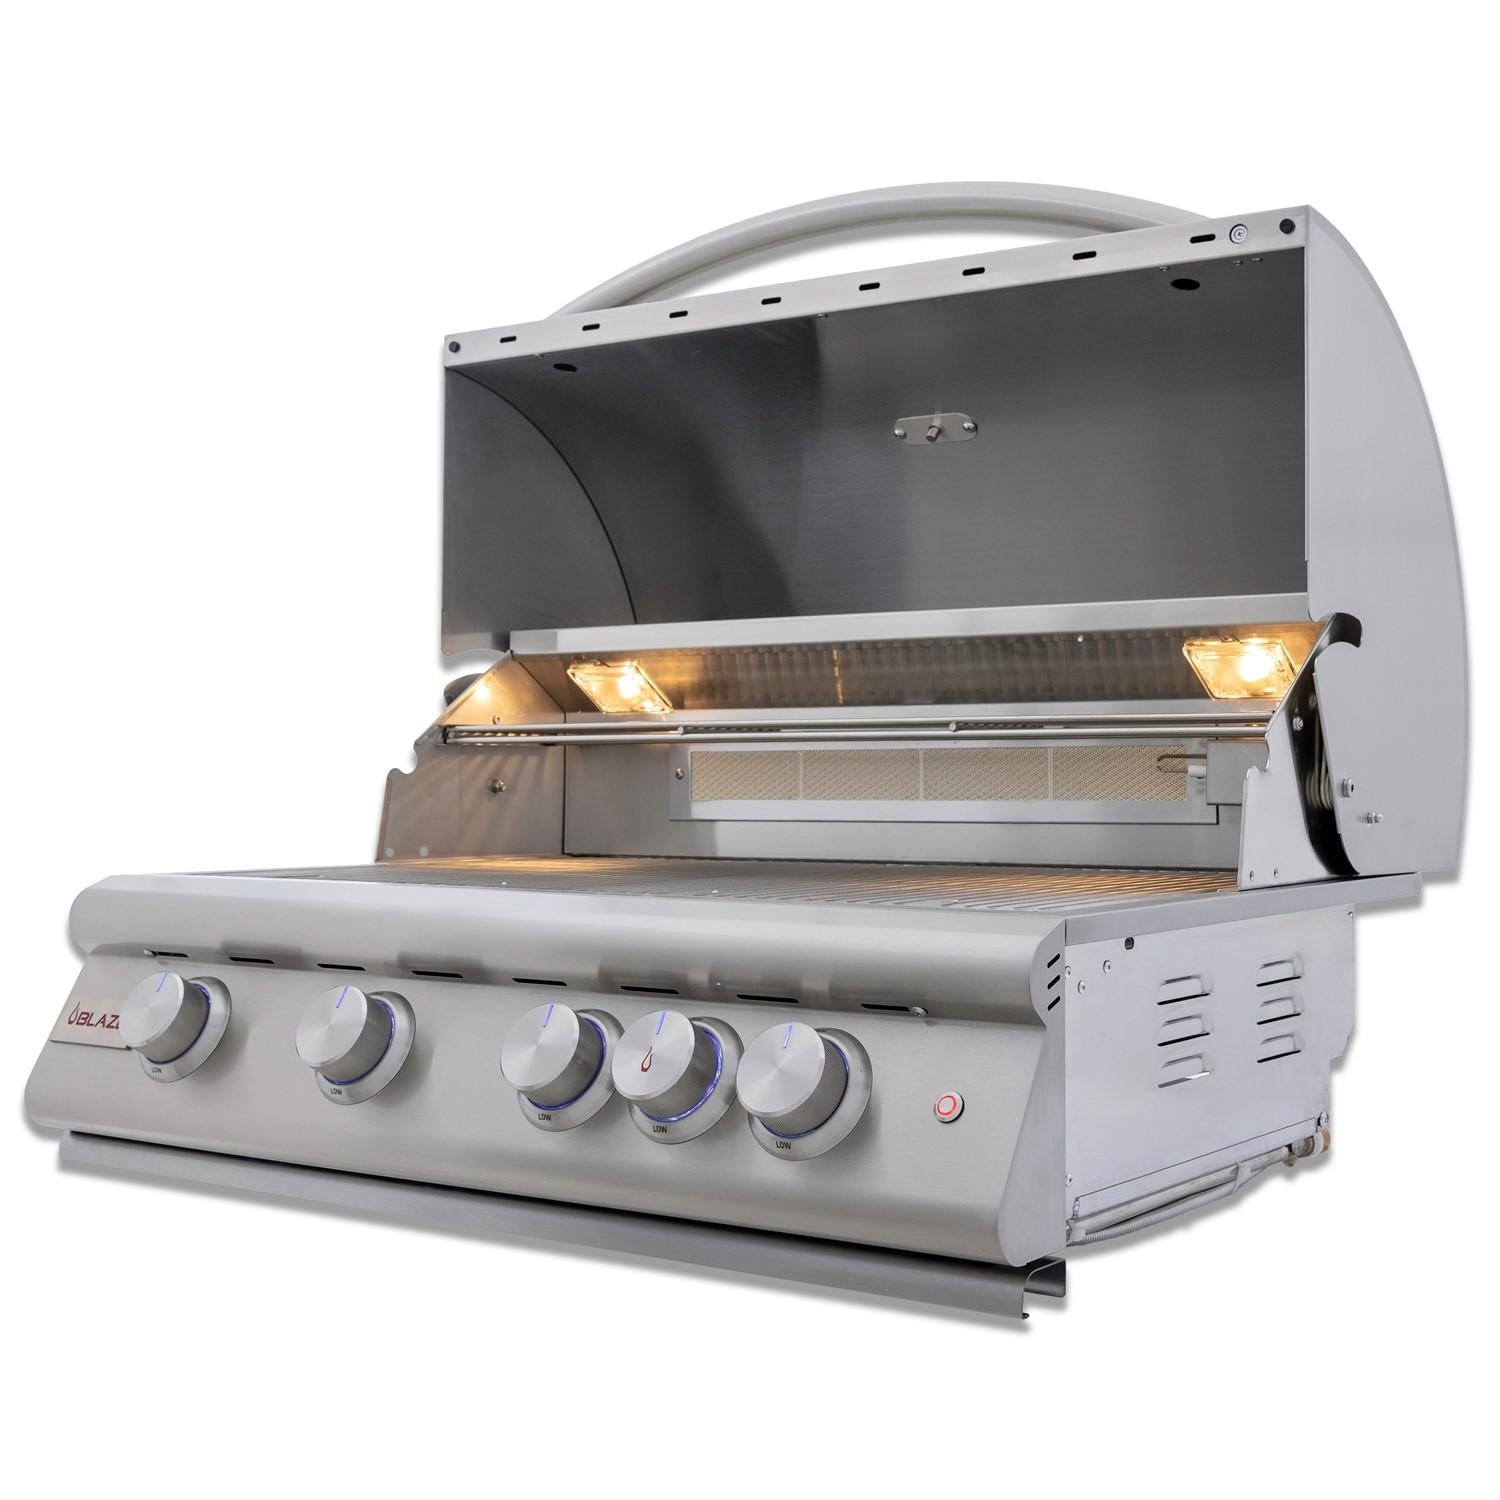 Blaze BLZ-4LTE3-LP Premium LTE+ 32-Inch 4-Burner Built-In Propane Grill With Rear Infrared Burner & Lift-Assist Hood - Angled View - Open - White Background